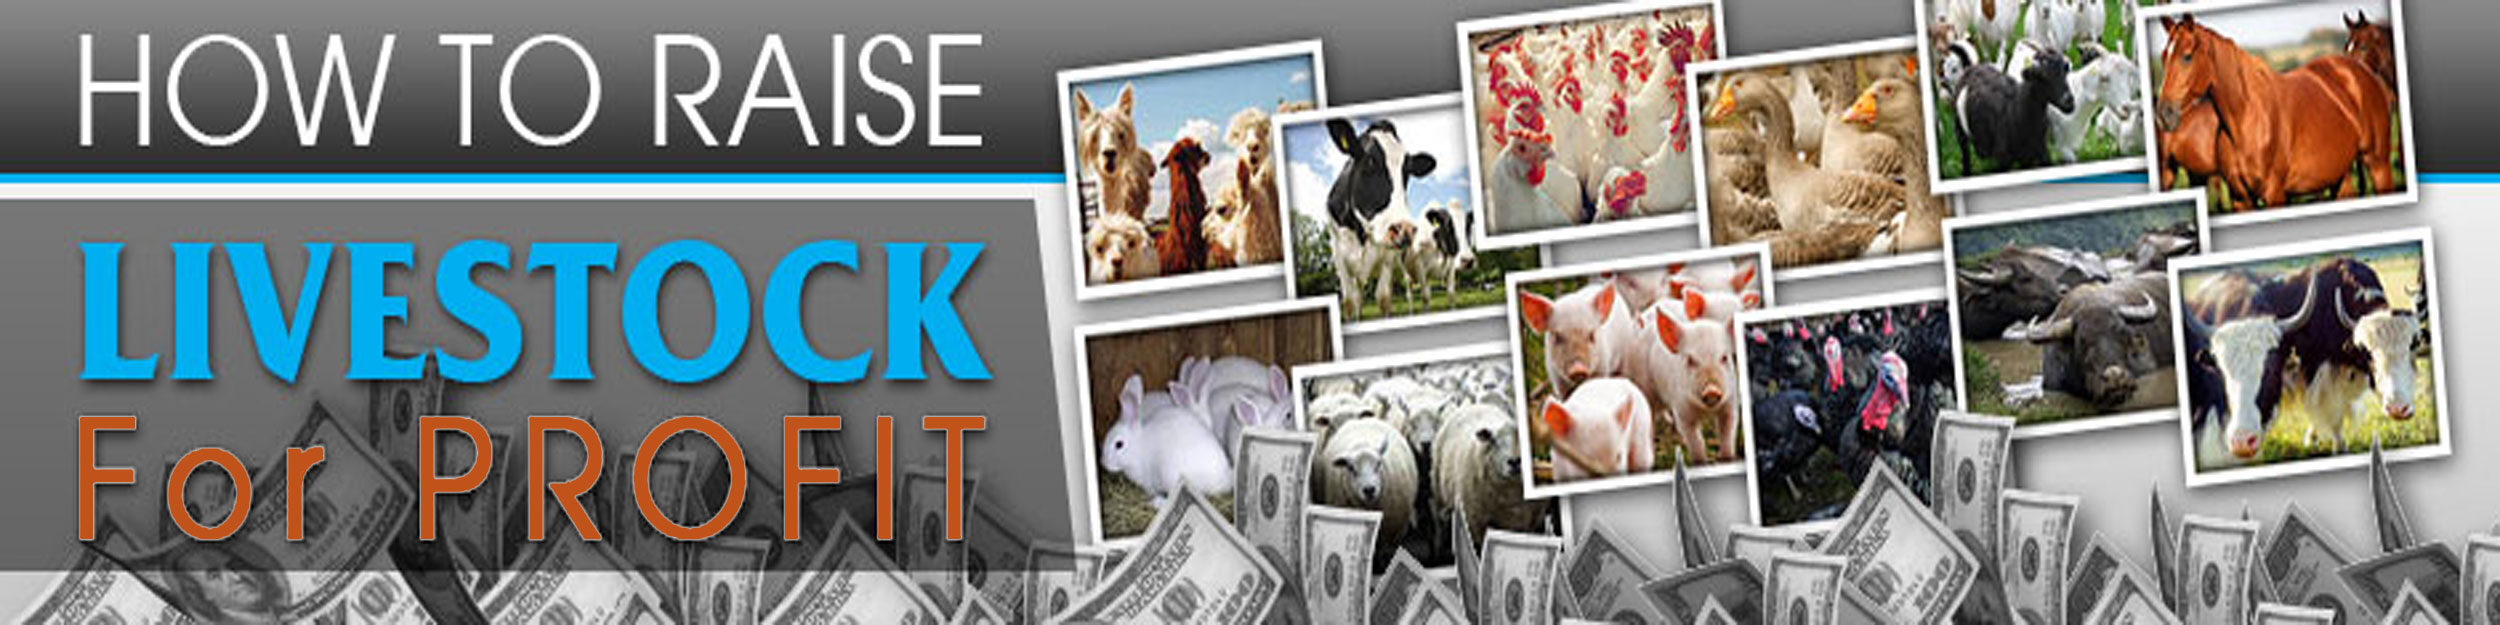 How To Raise Livestock For Profit